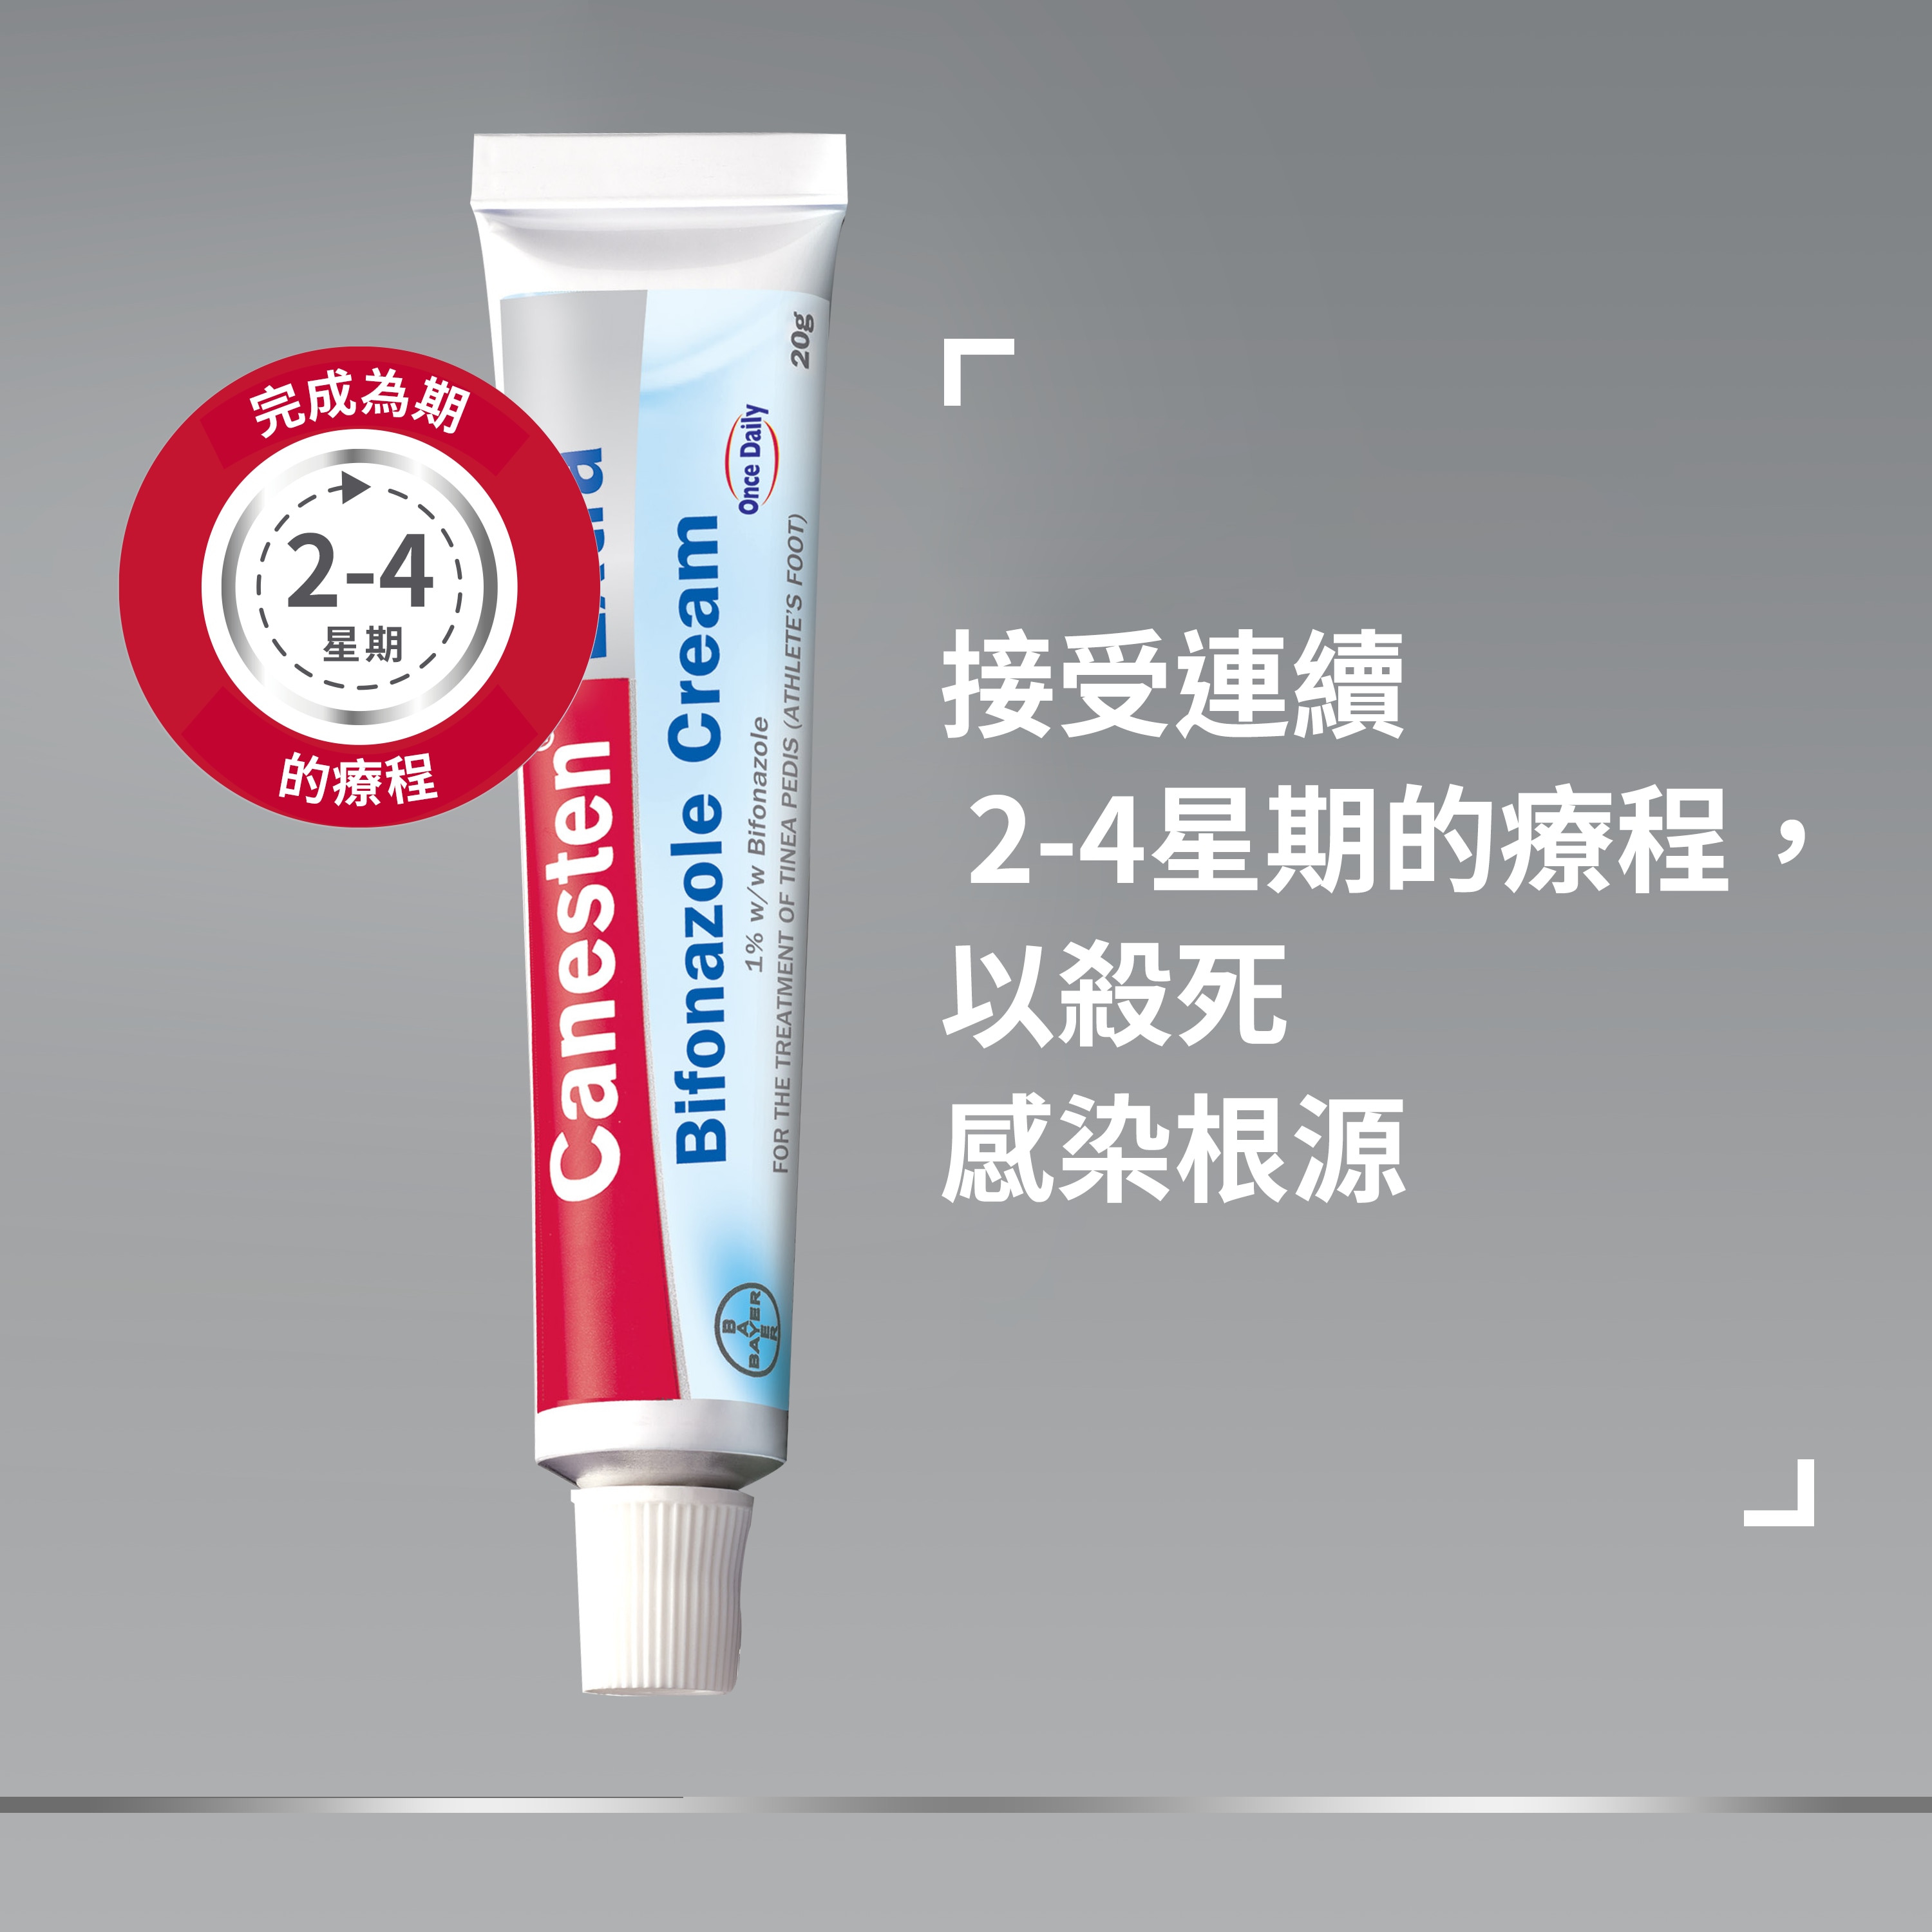 Canesten anti-fungal cream with Canesten badge: Complete 3 weeks treatment, and caption on the right: Continue treatment for 3 weeks to kill the root of the infection